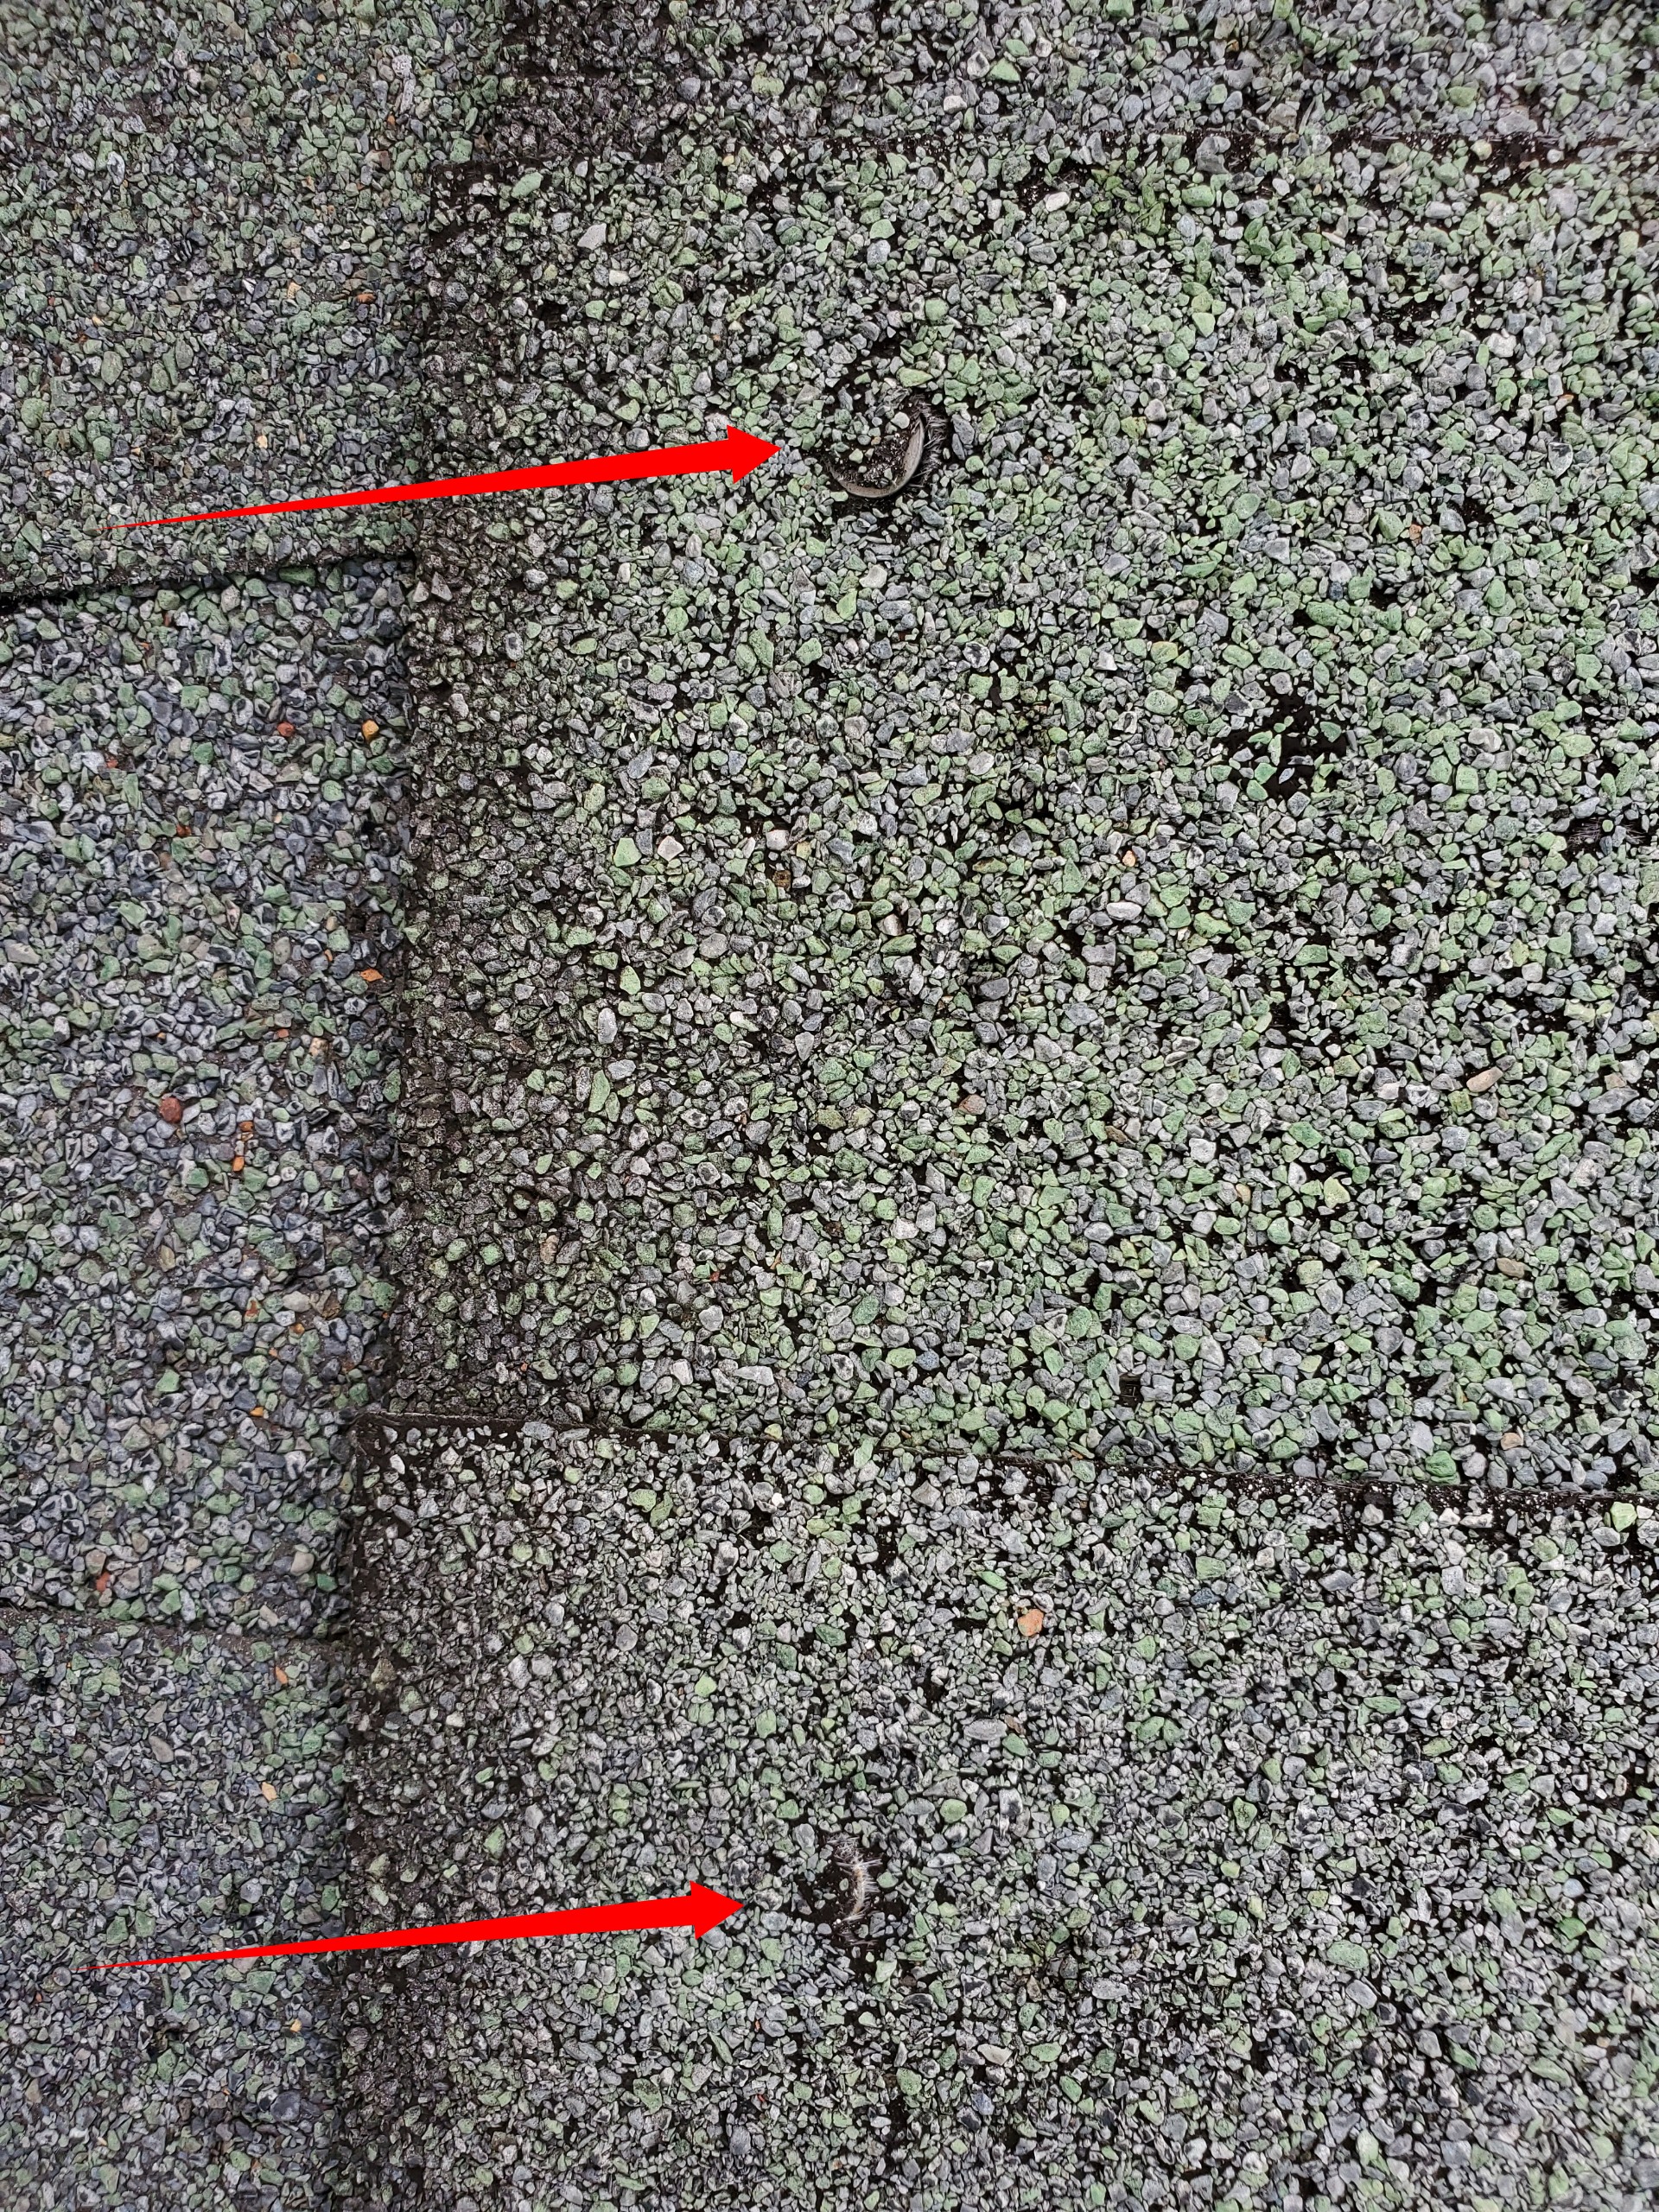 This is a picture of a nail pulling out of a shingle 